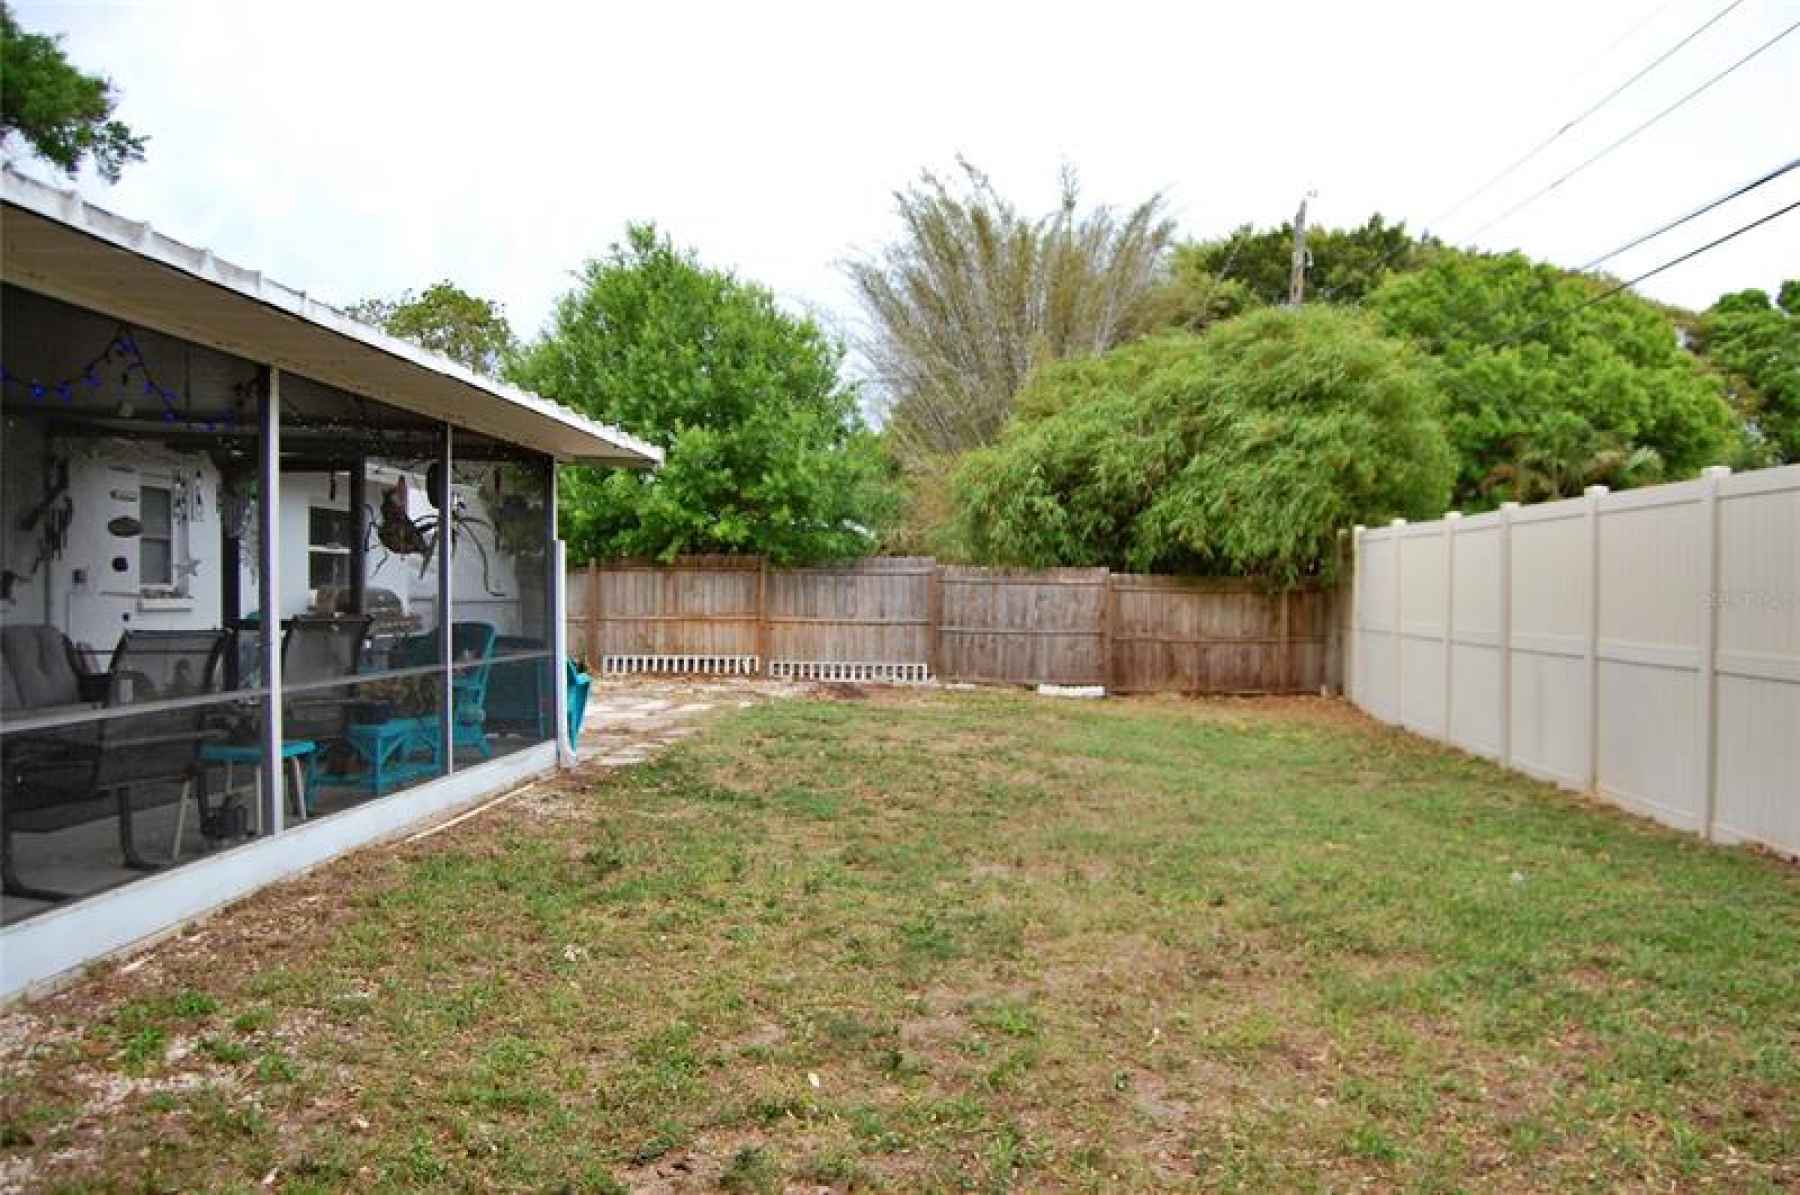 Fully fenced backyard with space for whatever you can imagine.